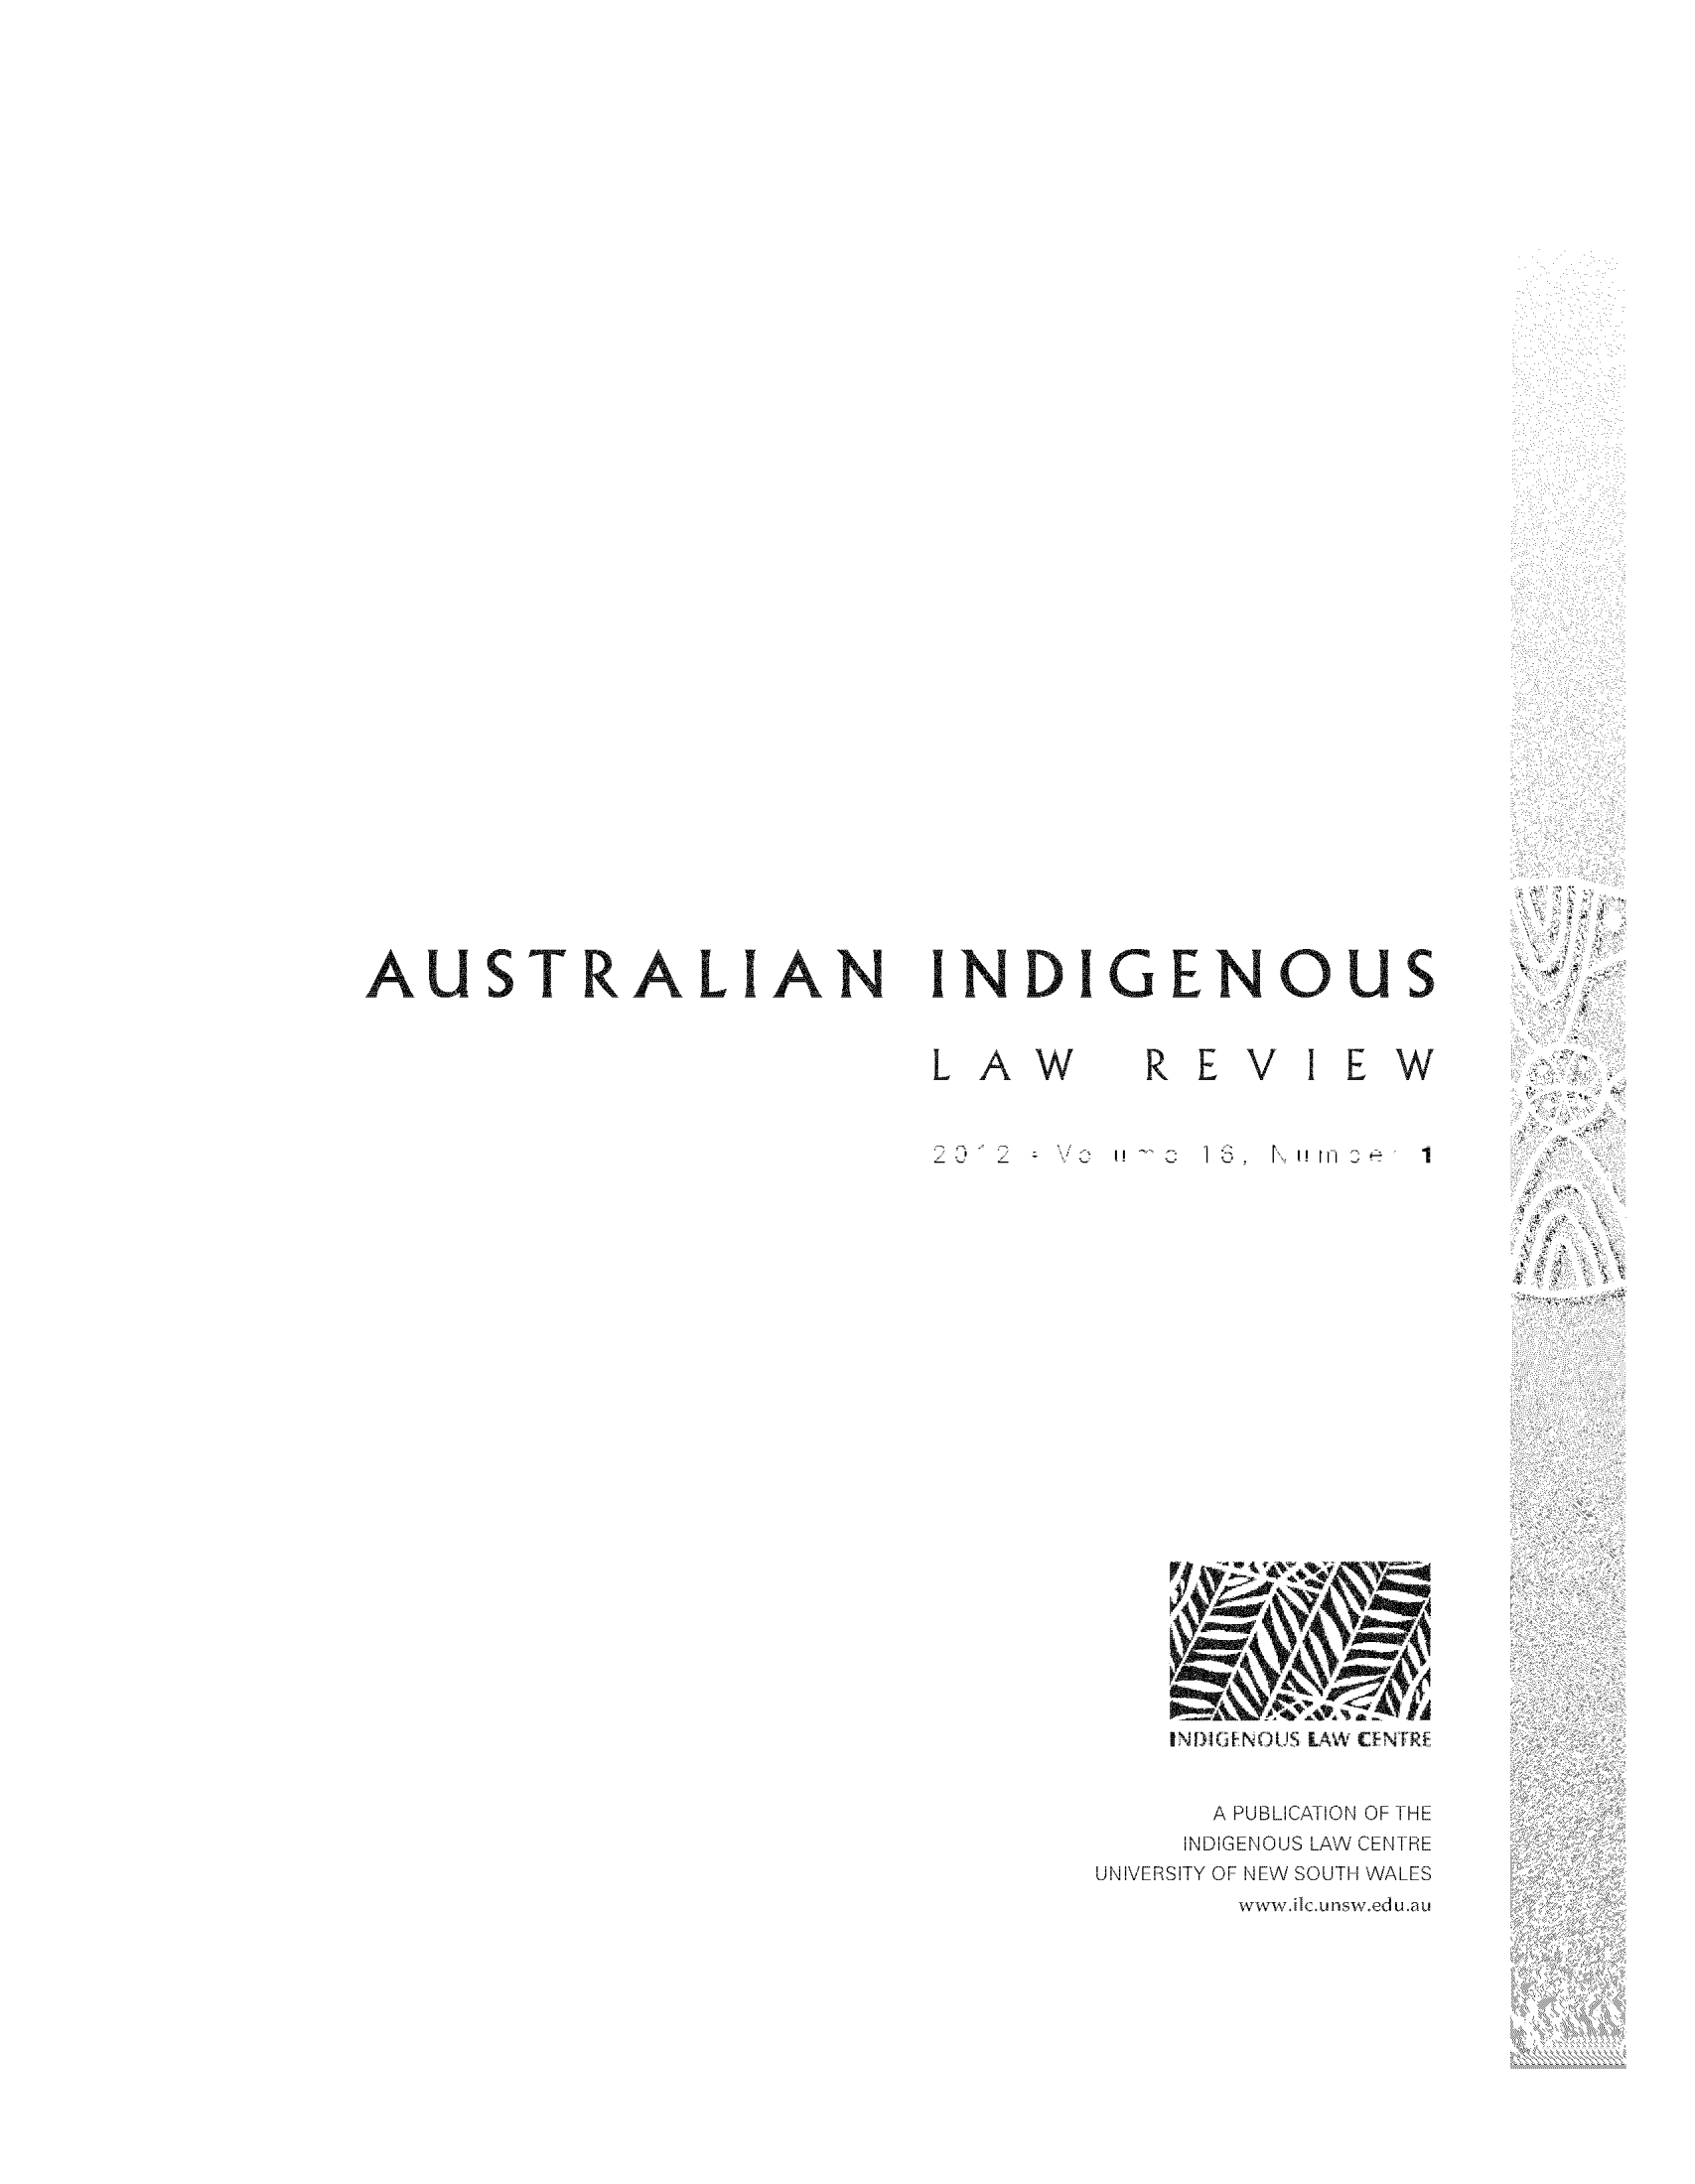 handle is hein.journals/austindlr16 and id is 1 raw text is: ï»¿AUSTRALIAN INDIGENOUS

LAW RE

VIEW

ii                                F         [ii                   1

INIGENOUS LAW CENTRE
A PUBLICATION OF THE
INDIGENOUS LAW CENTRE
UNIVERSITY OF NEW SOUTH WALES
www.ilc.unsw.edu.au


